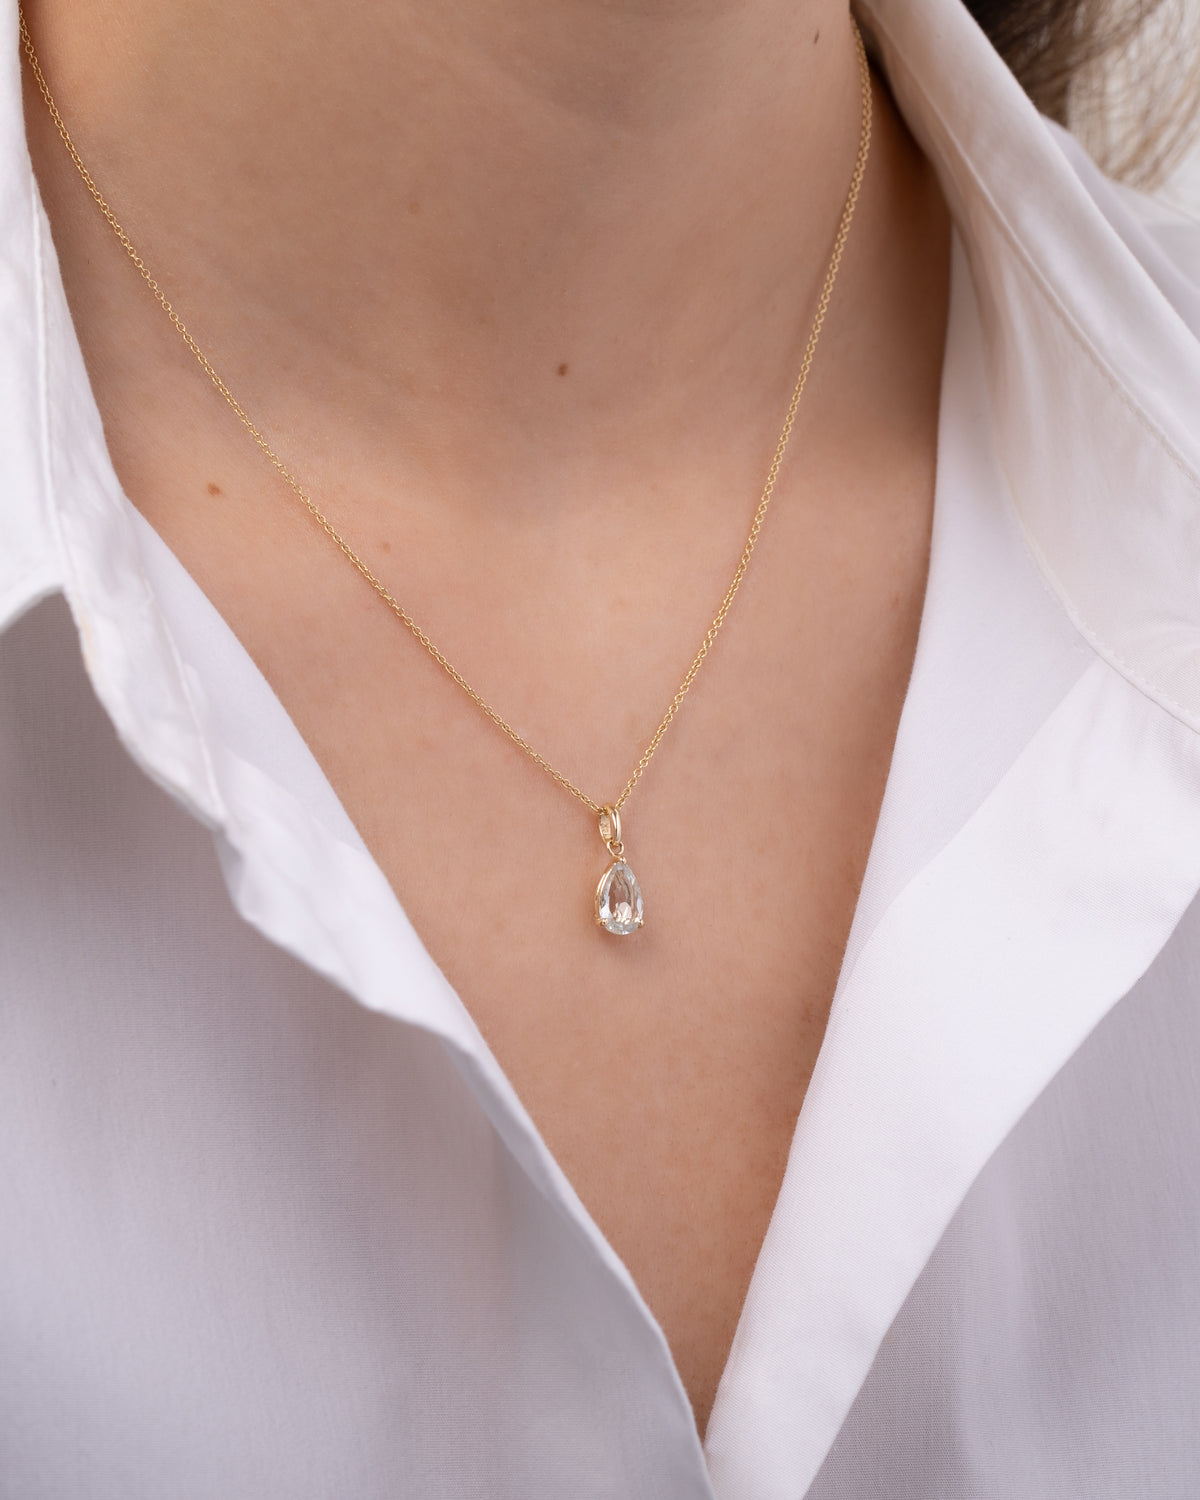 White Topaz Pear Necklace